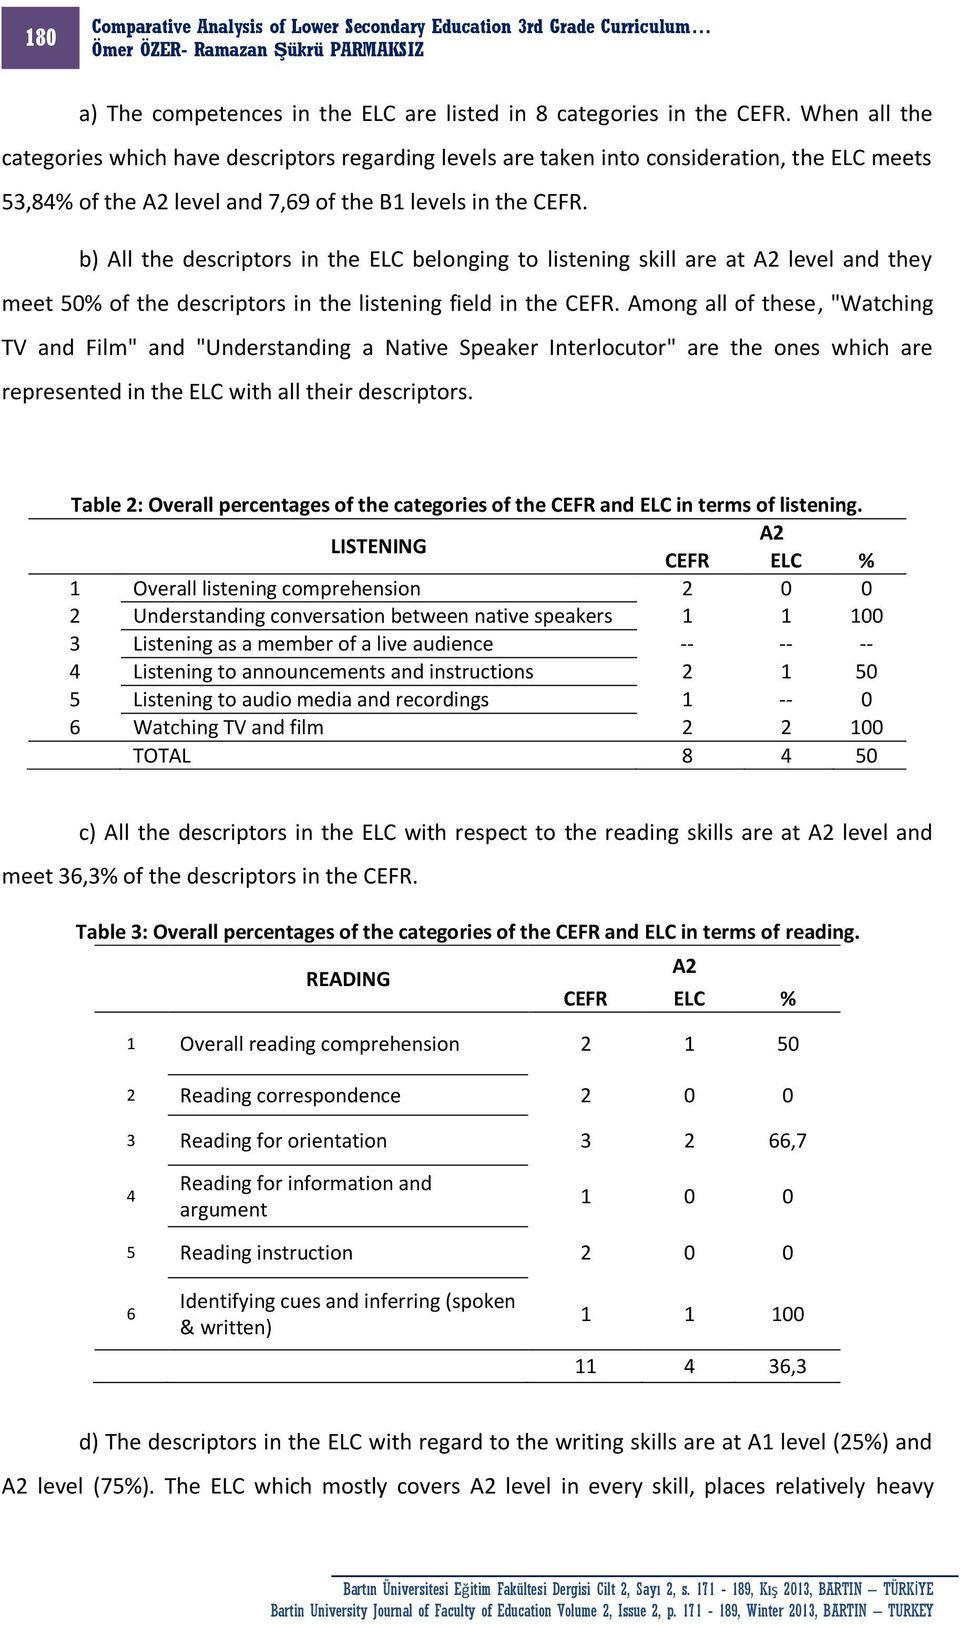 b) All the descriptors in the ELC belonging to listening skill are at A2 level and they meet 50% of the descriptors in the listening field in the CEFR.